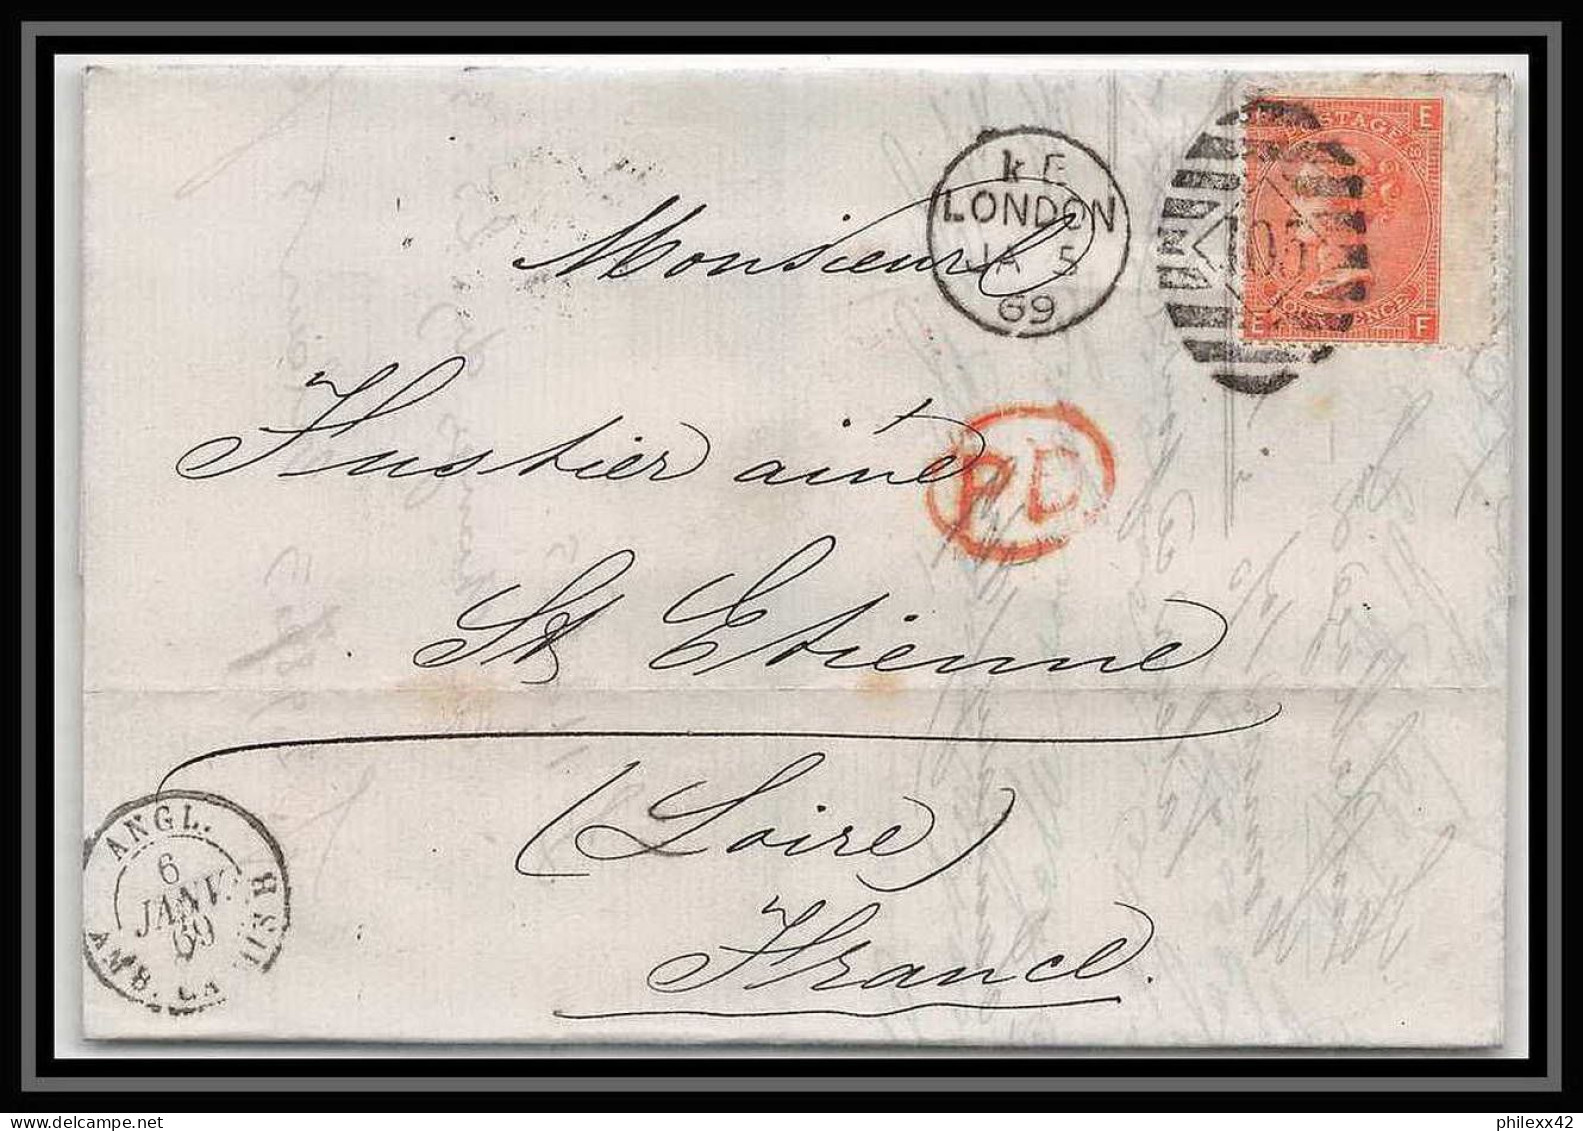 35855 N°32 Victoria 4p Red London St Etienne France 1869 Cachet 105 Lettre Cover Grande Bretagne England - Covers & Documents